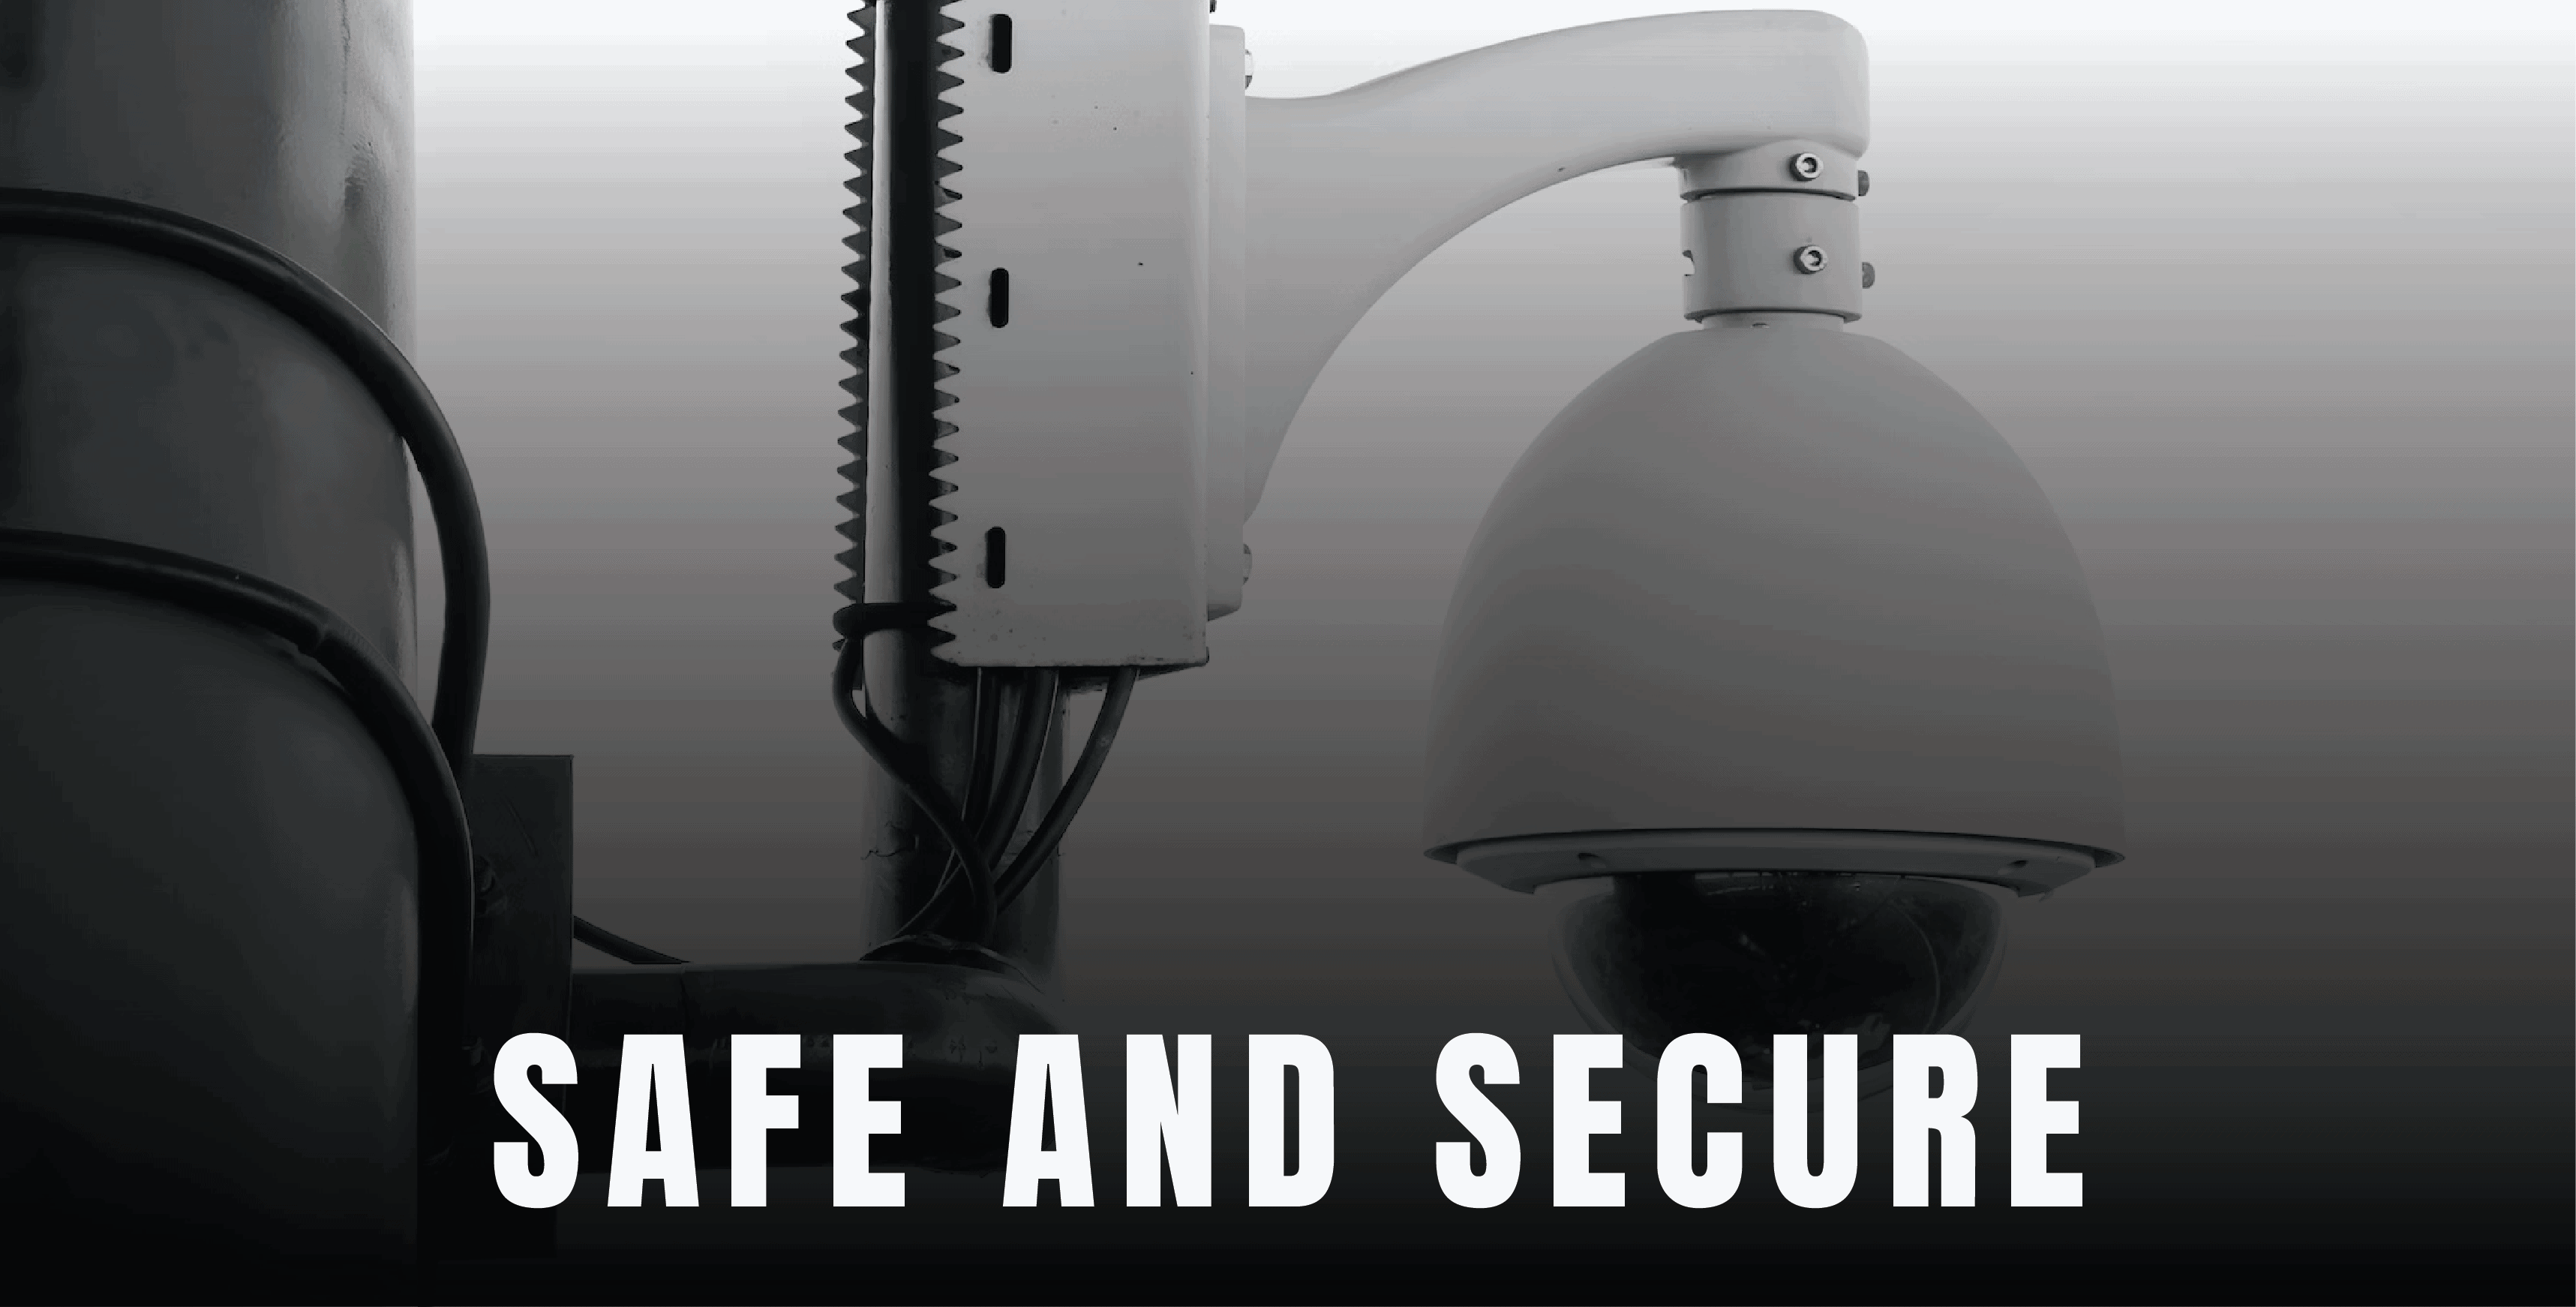 Be safe and secure, on site security